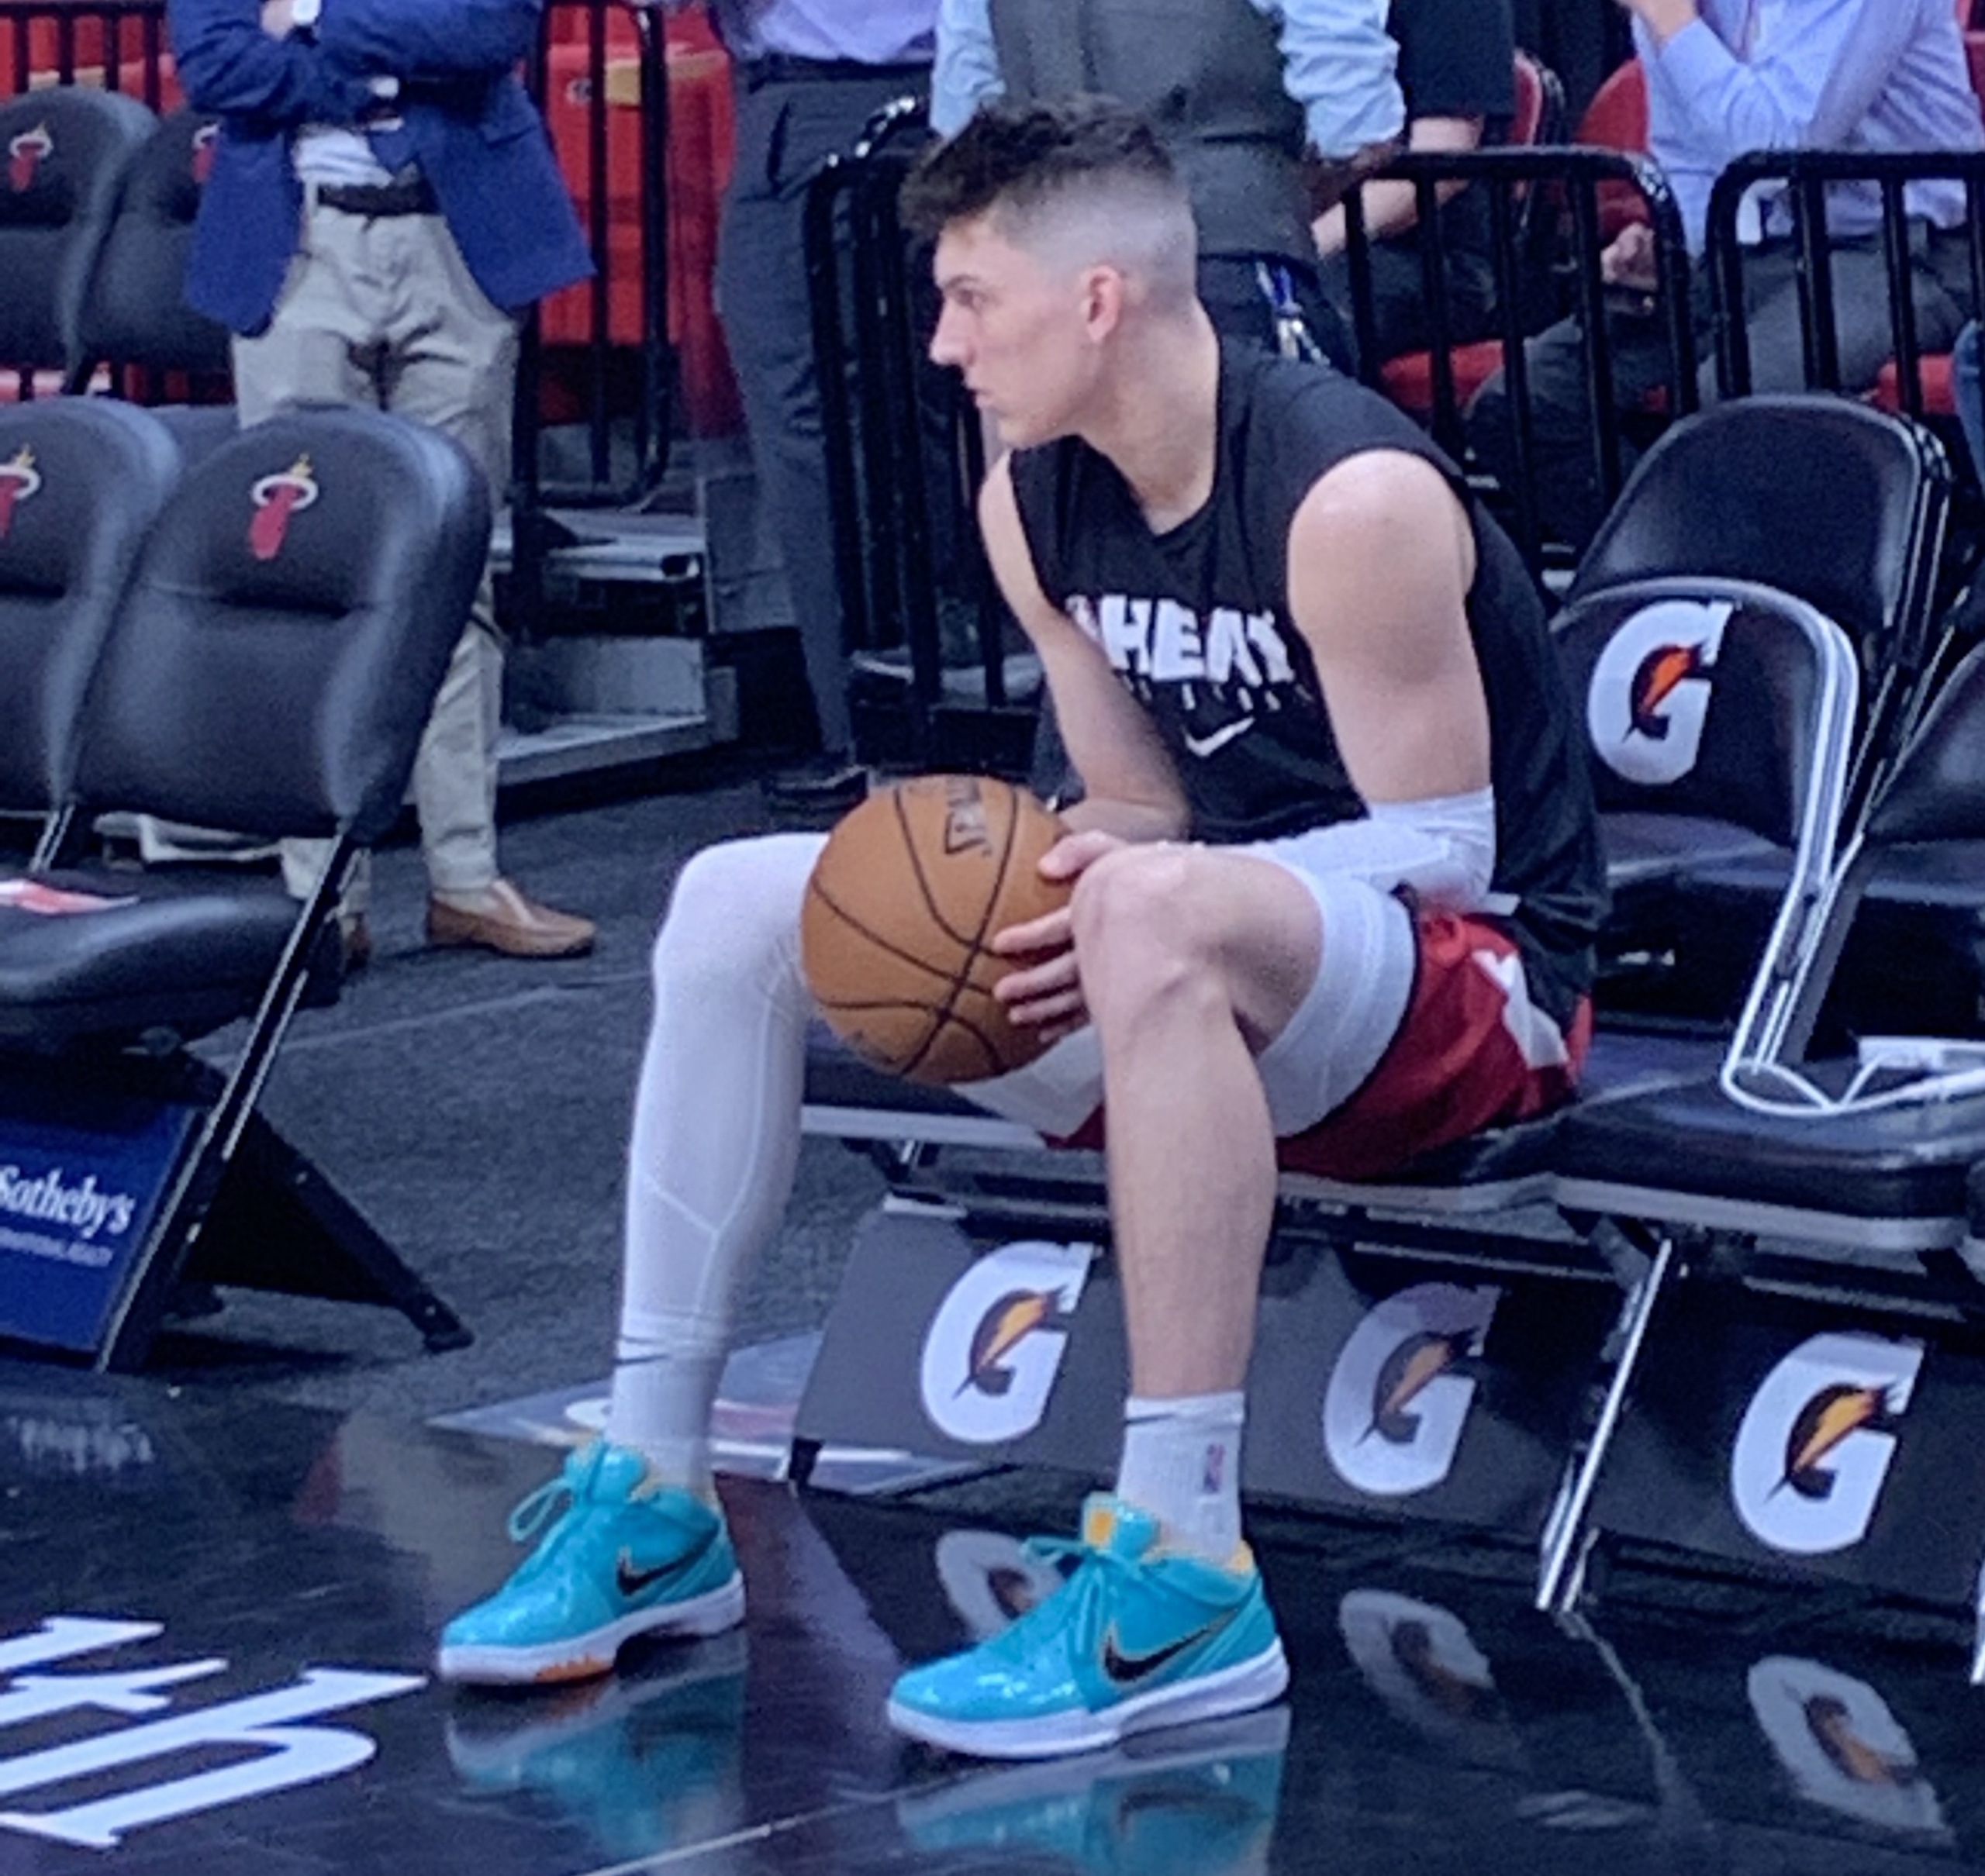 Tyler Herro's big night brings attention to the message of Black